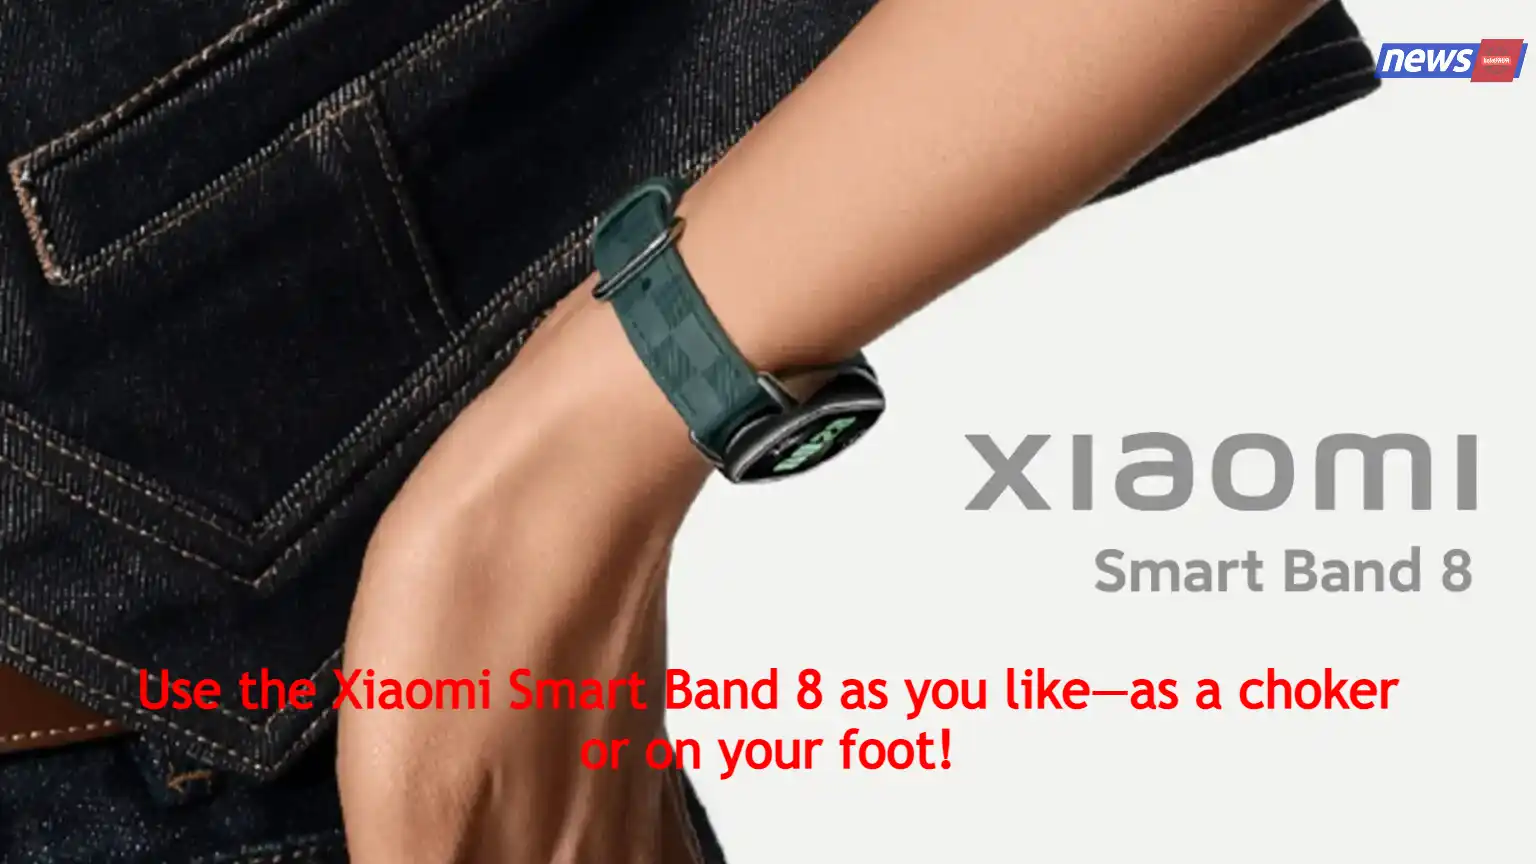 Use the Xiaomi Smart Band 8 as you like—as a choker or on your foot!